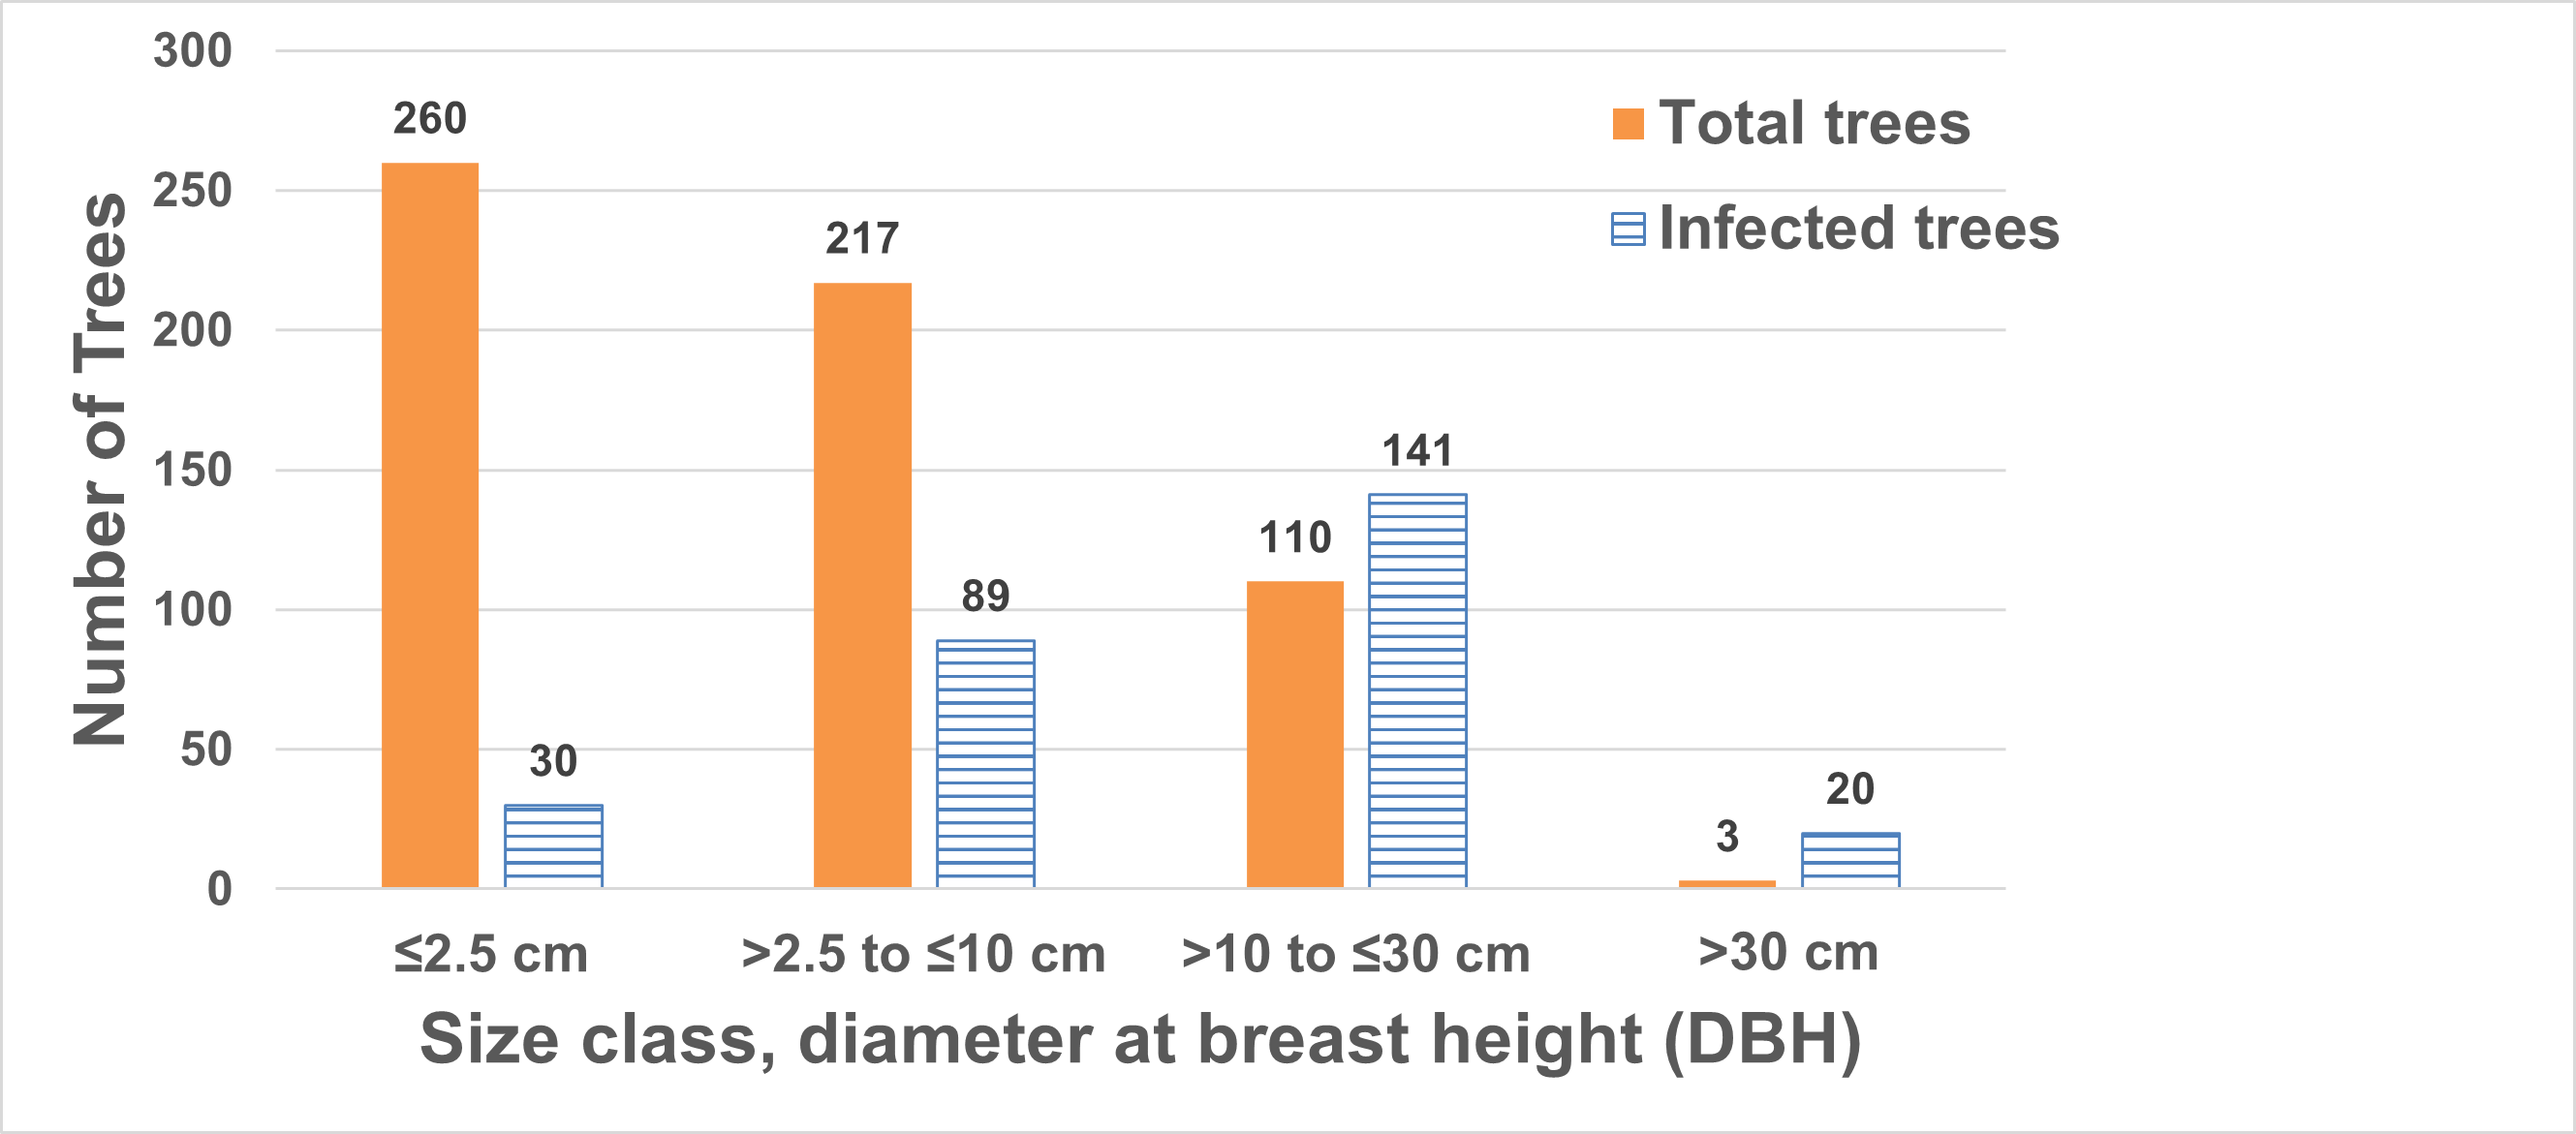 Bar chart of whitebark pine trees infected with blister rust compared with the total number of trees surveyed in 2023, showing that proportion infection was highest in the 10-30 cm dbh size class.